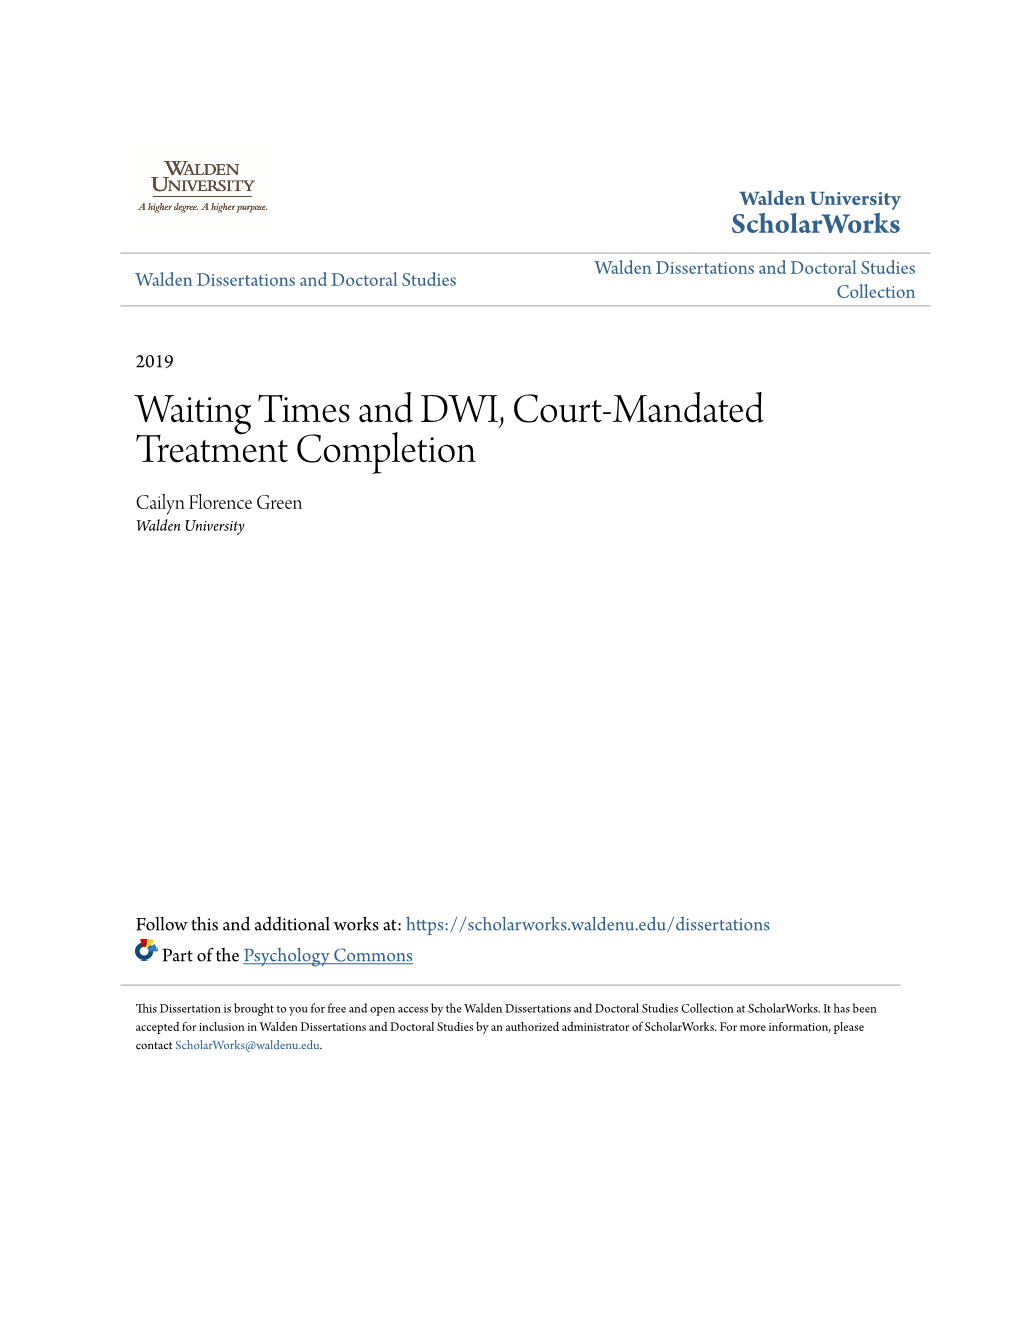 Waiting Times and DWI, Court-Mandated Treatment Completion Cailyn Florence Green Walden University